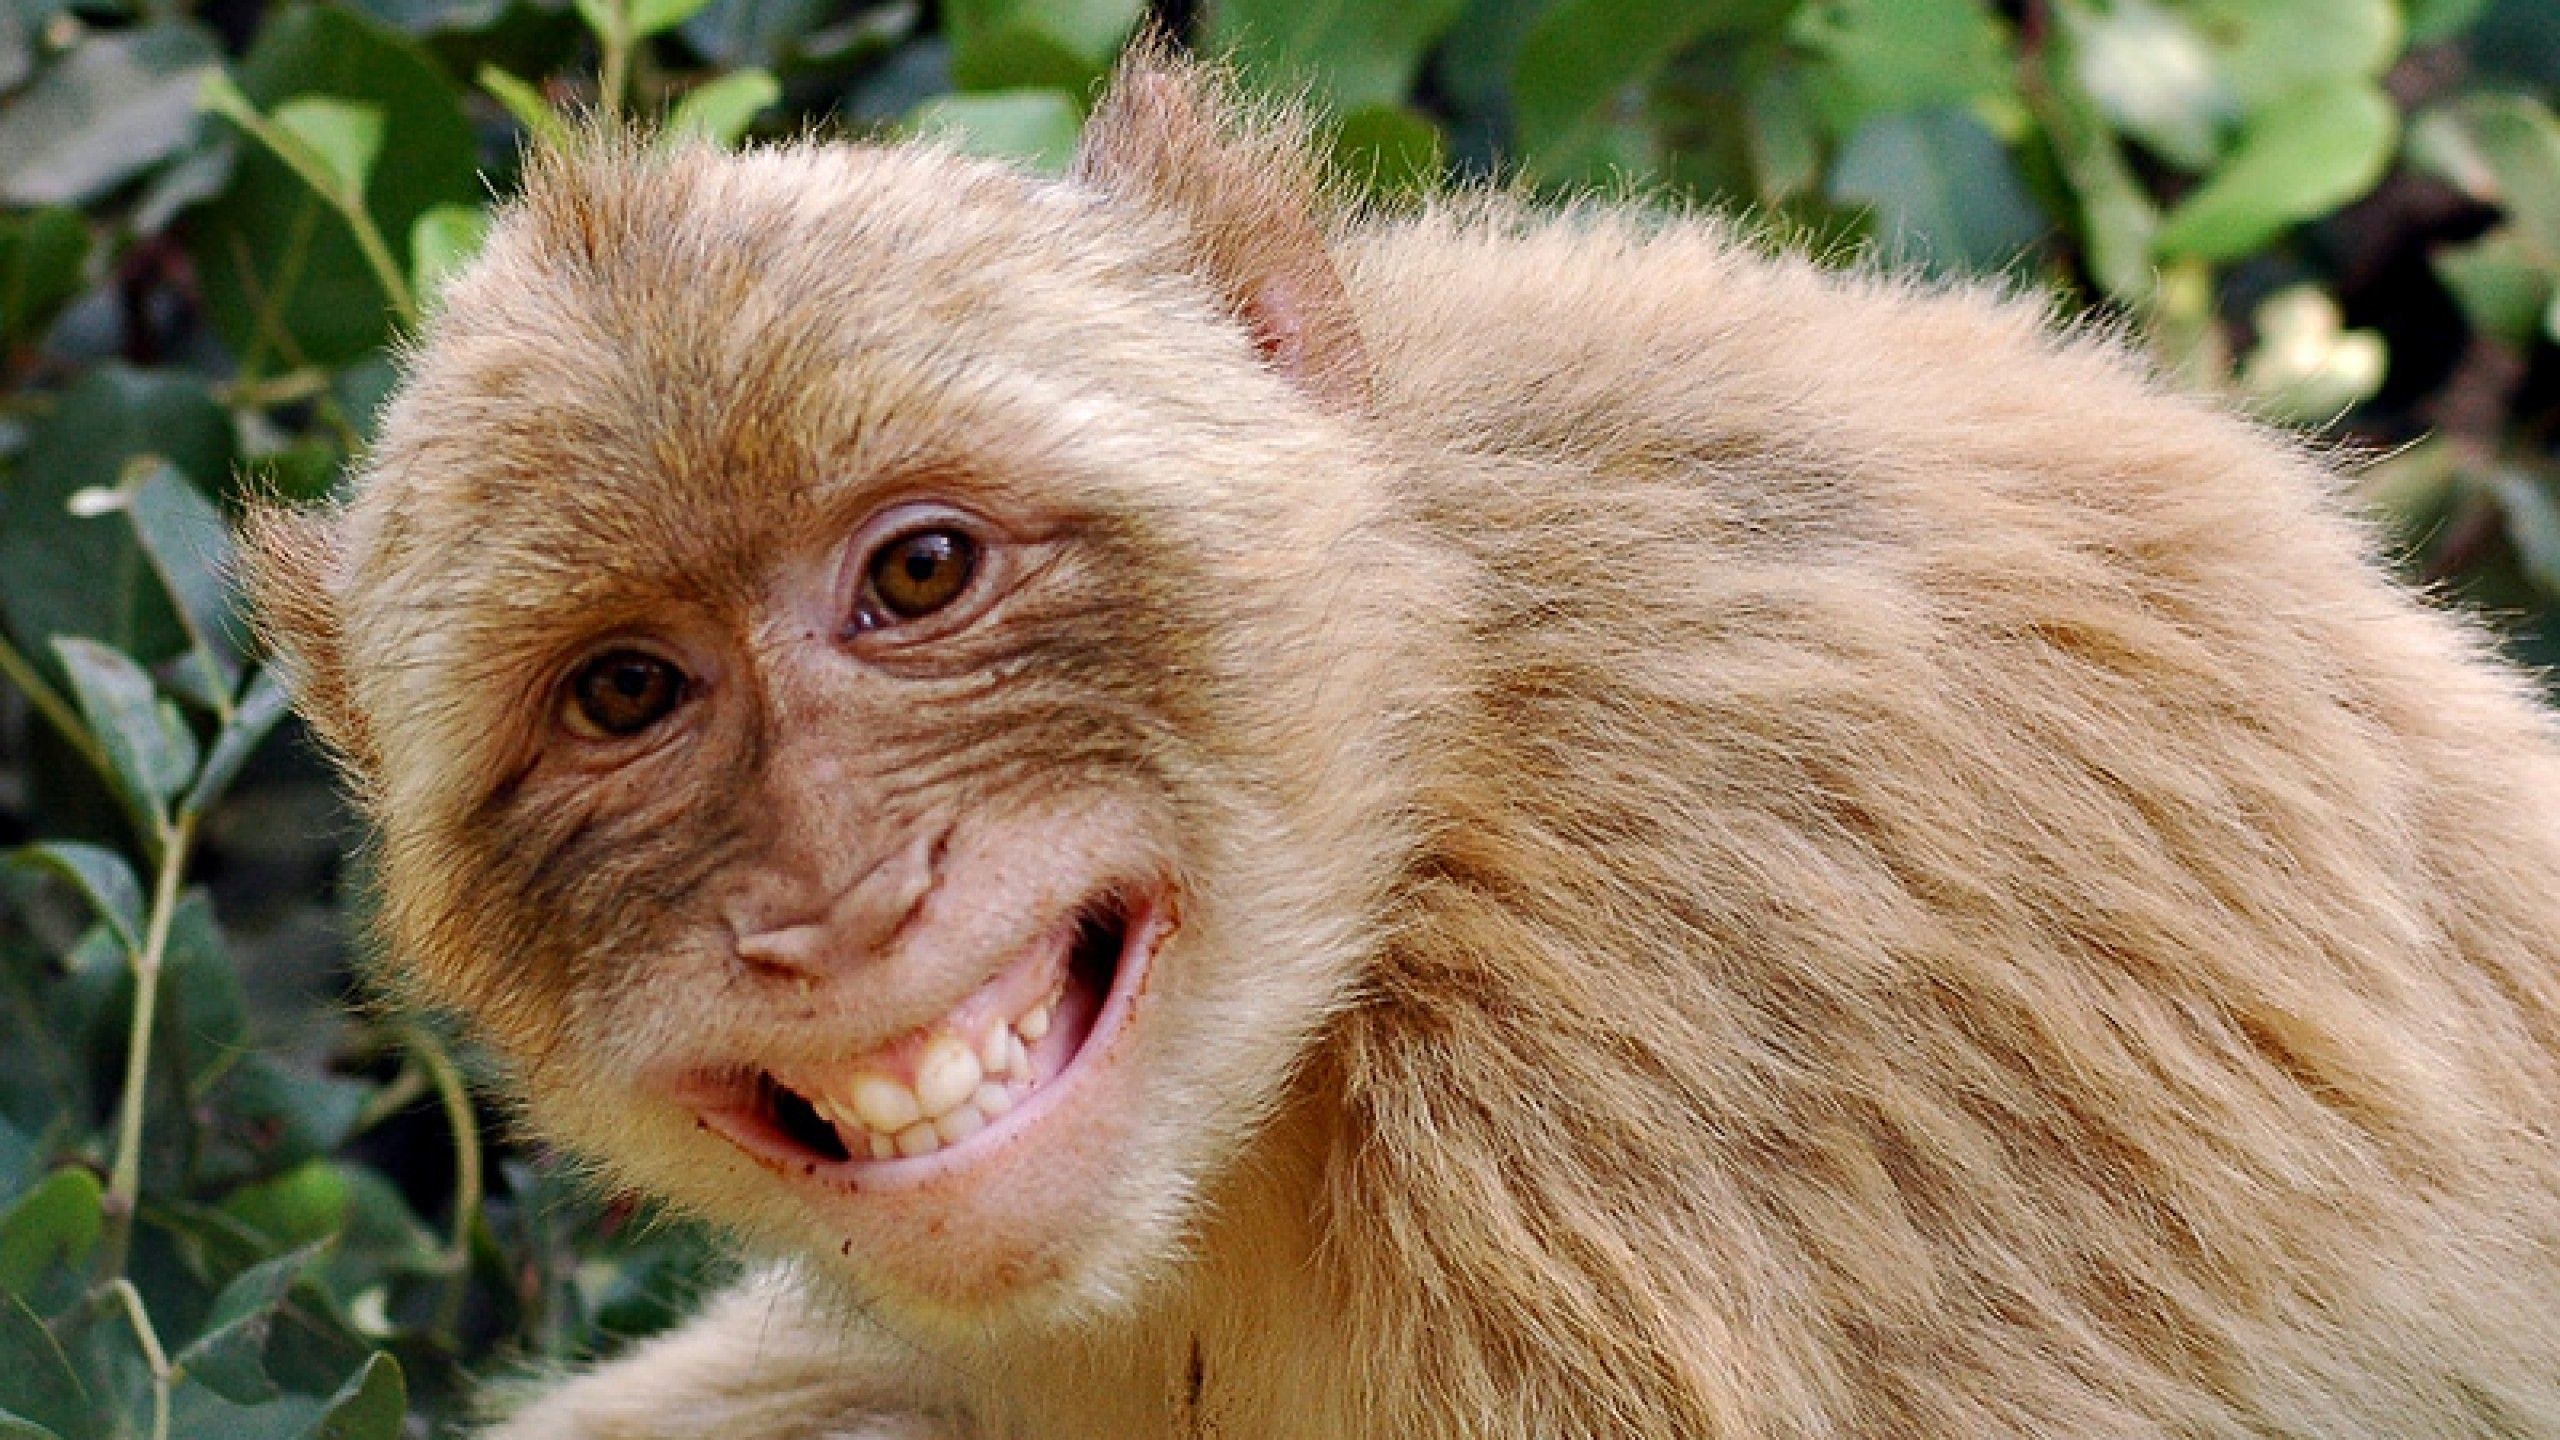 2560x1440 Funny Monkey Pictures Wallpaper Wallpaper Download MONKEY | HD Wallpapers |  Pinterest | Monkey wallpaper, Hd wallpaper and Wallpaper